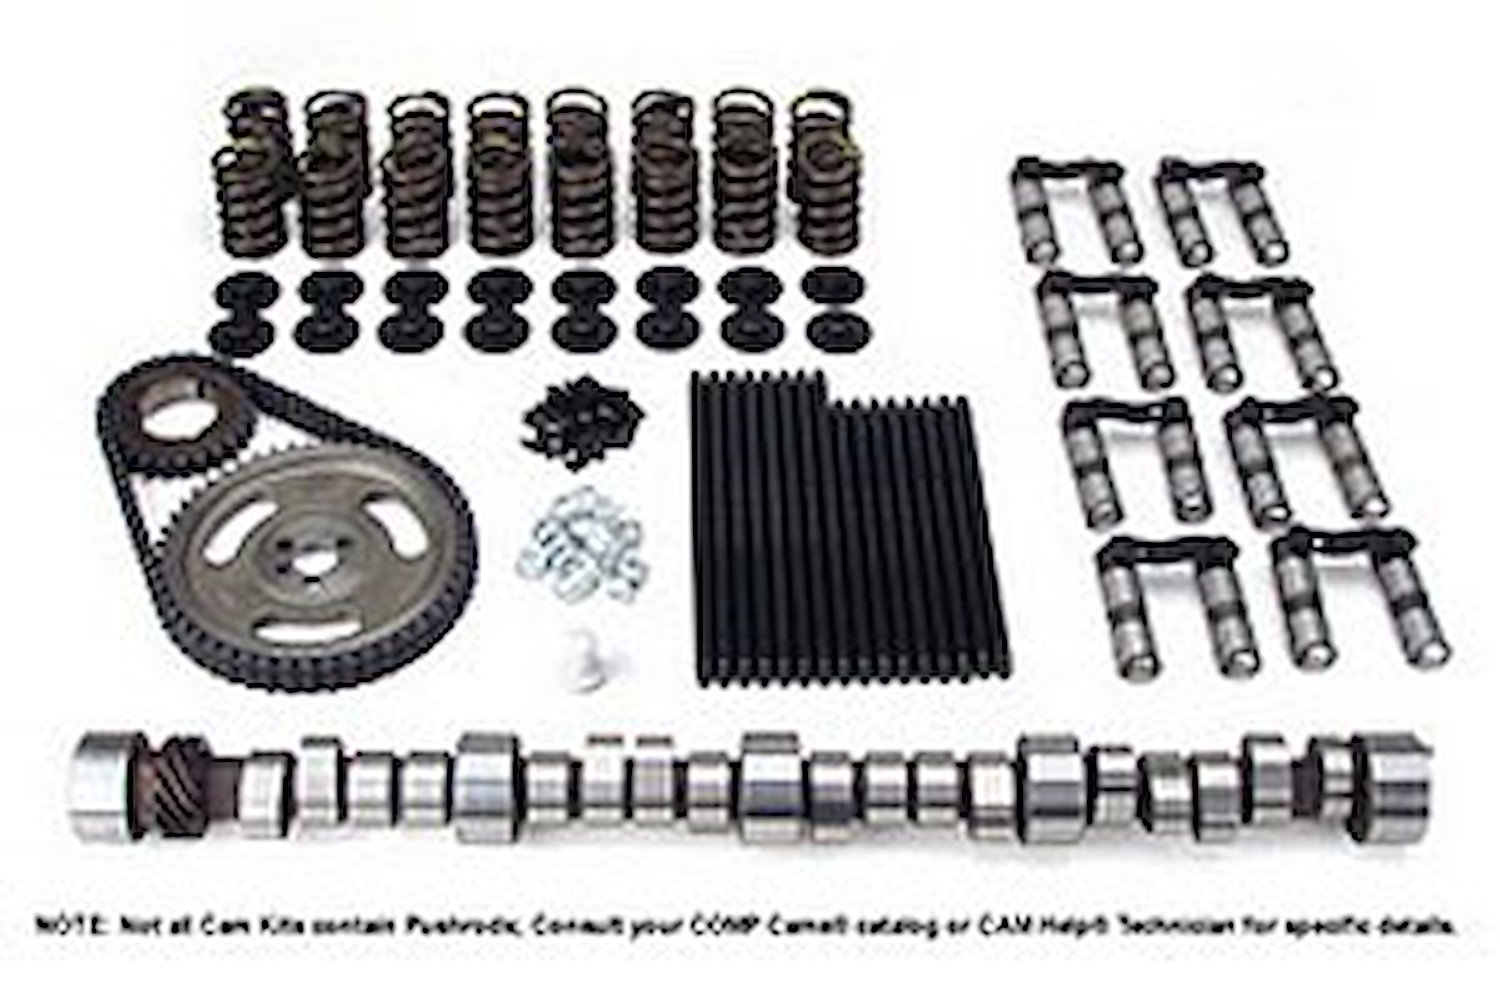 Nitrous HP Retro Fit Hyd. Roller Cam Complete Kit Chevy Small Block 262-400ci 1955-98 Lift: .520"/.540"